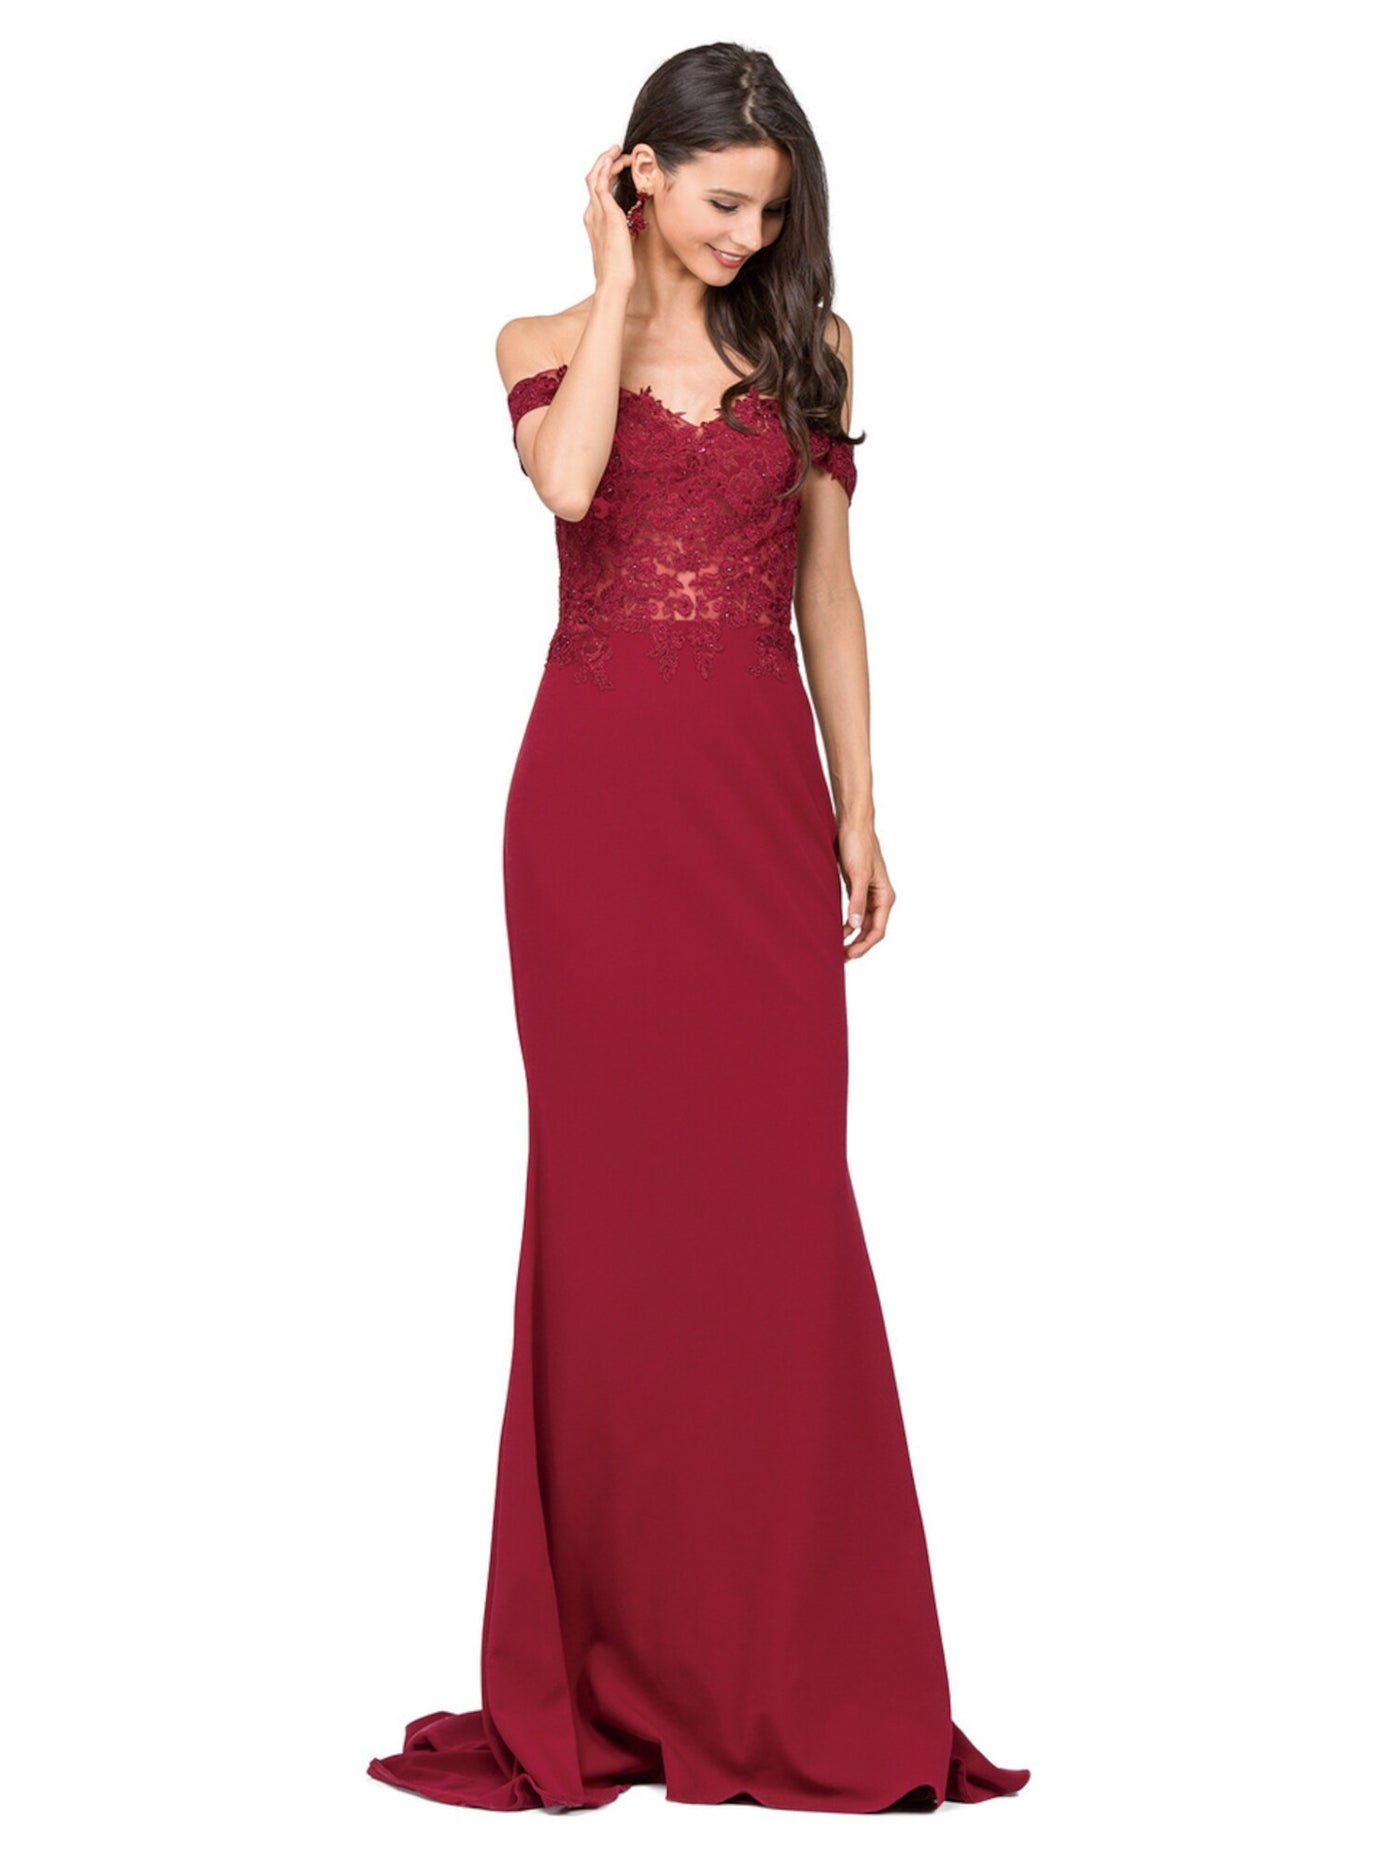 DANCING QUEEN Womens Red Embellished Embroidered Printed Spaghetti Strap Off Shoulder Full-Length Evening Sheath Dress Juniors L